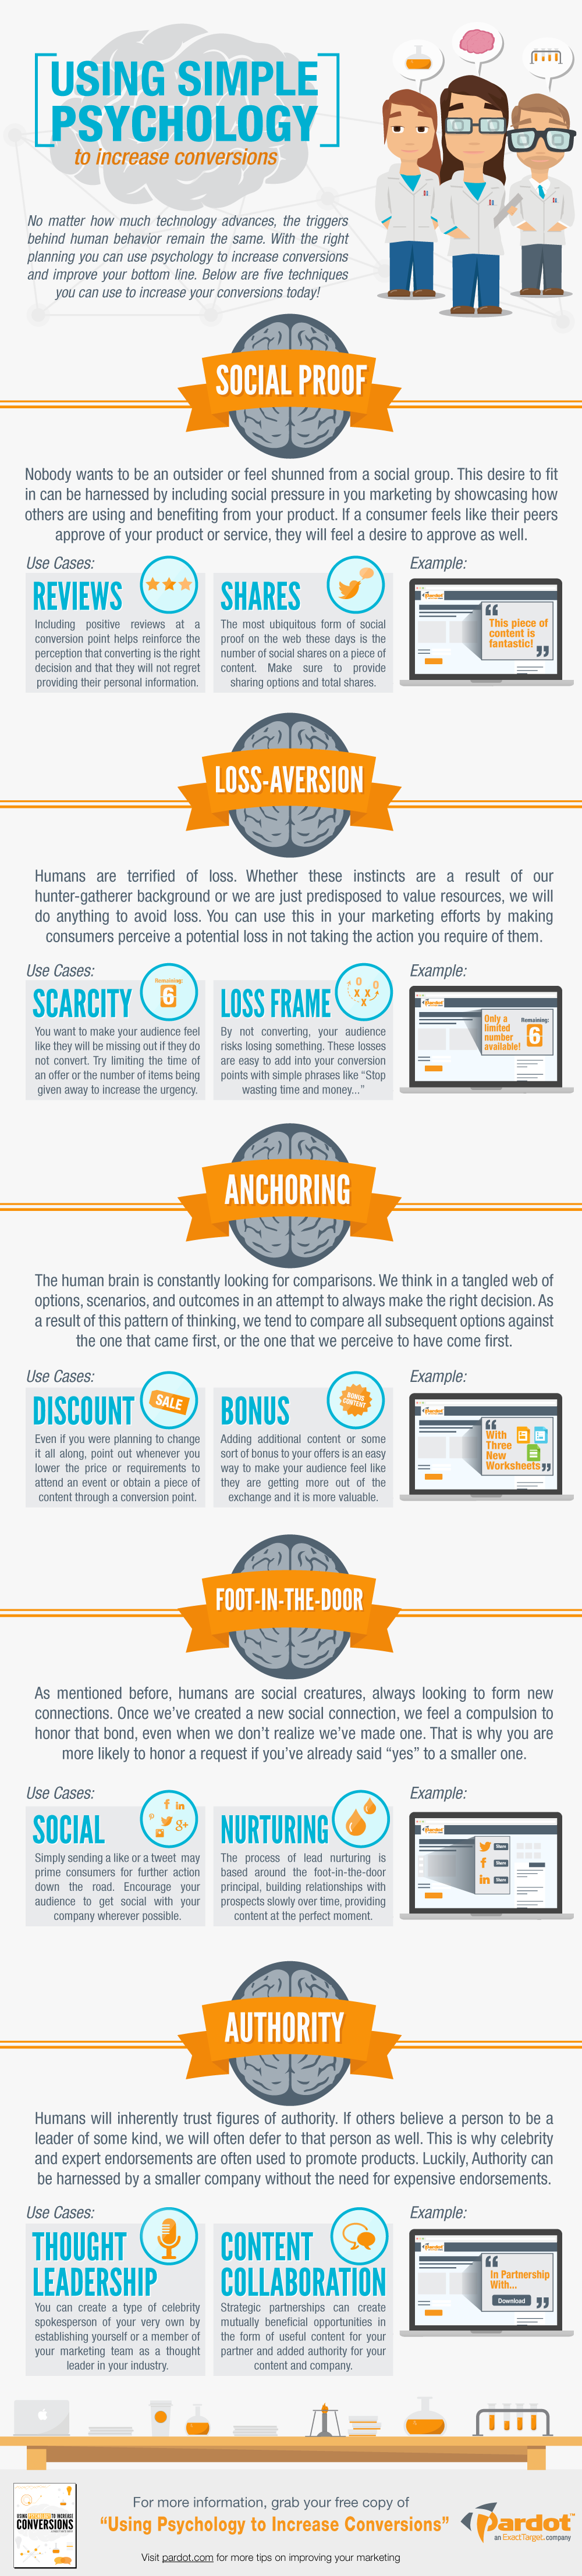 social media psychology of influence infographic